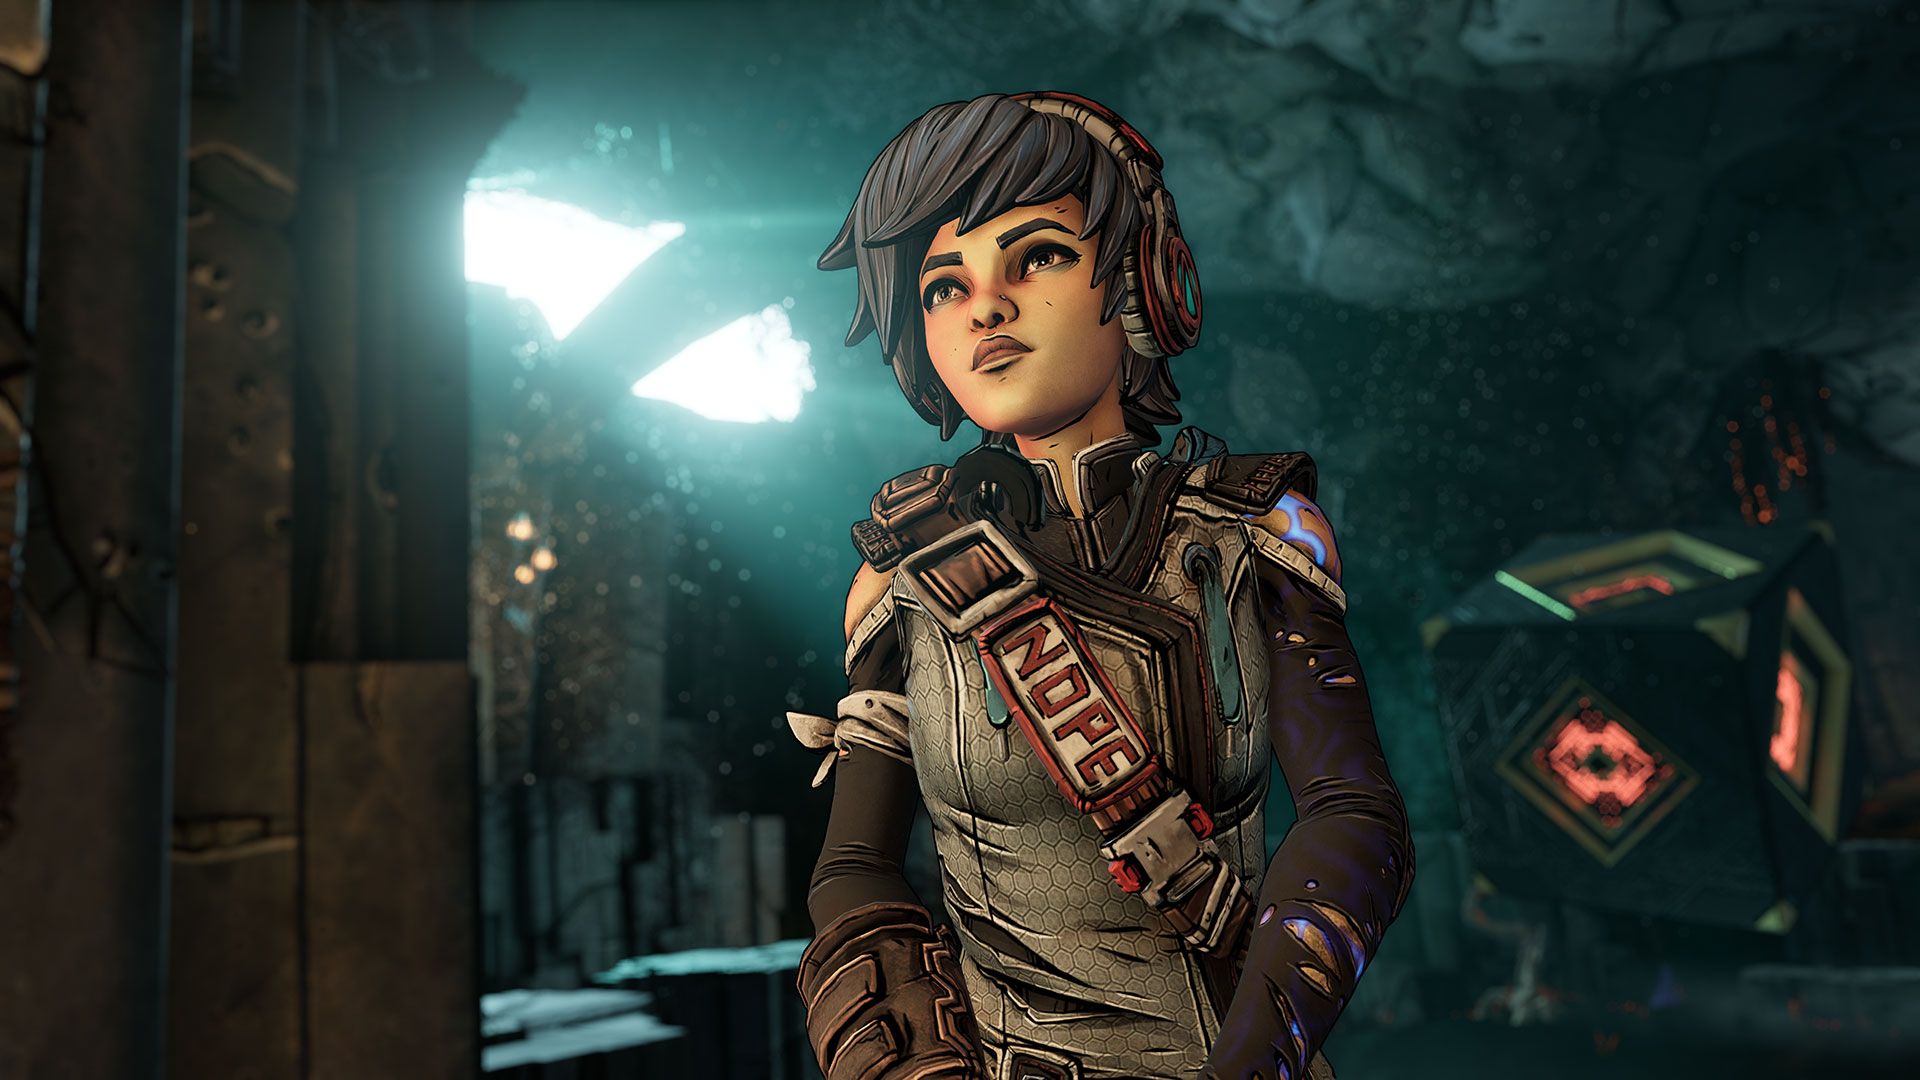 Borderlands 3 Director's Cut DLC Guide - Ava and the Mysteriouslier podcast